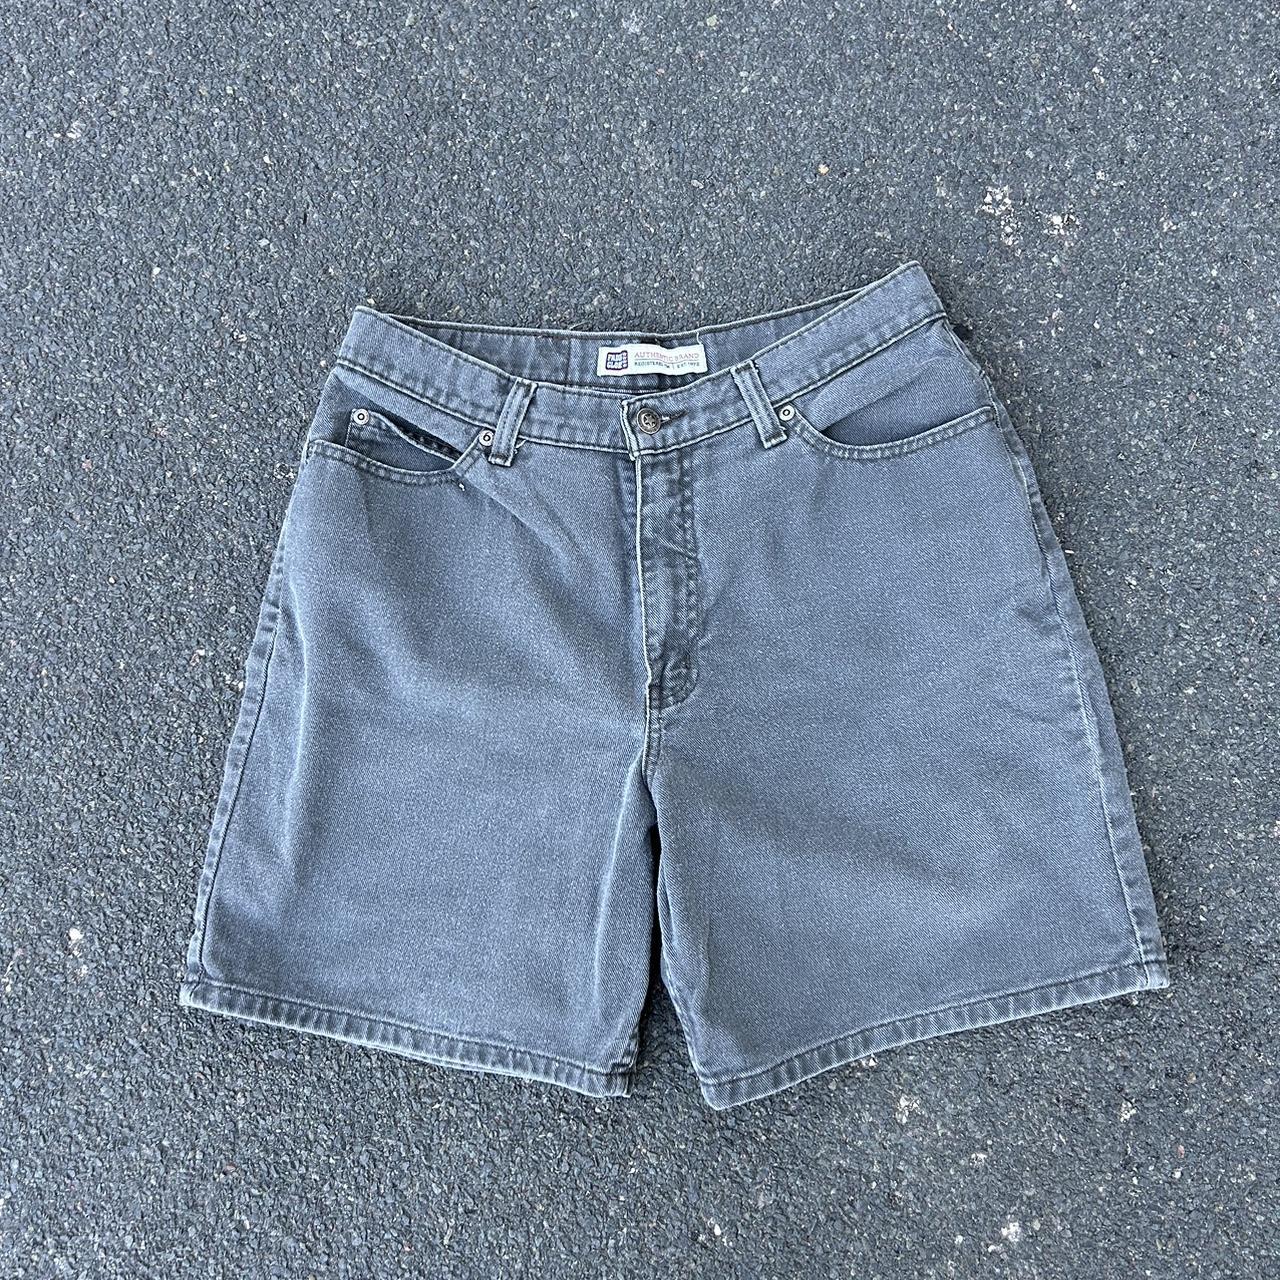 Vintage Faded Glory Jorts. Nice relaxed fit. Size:... - Depop